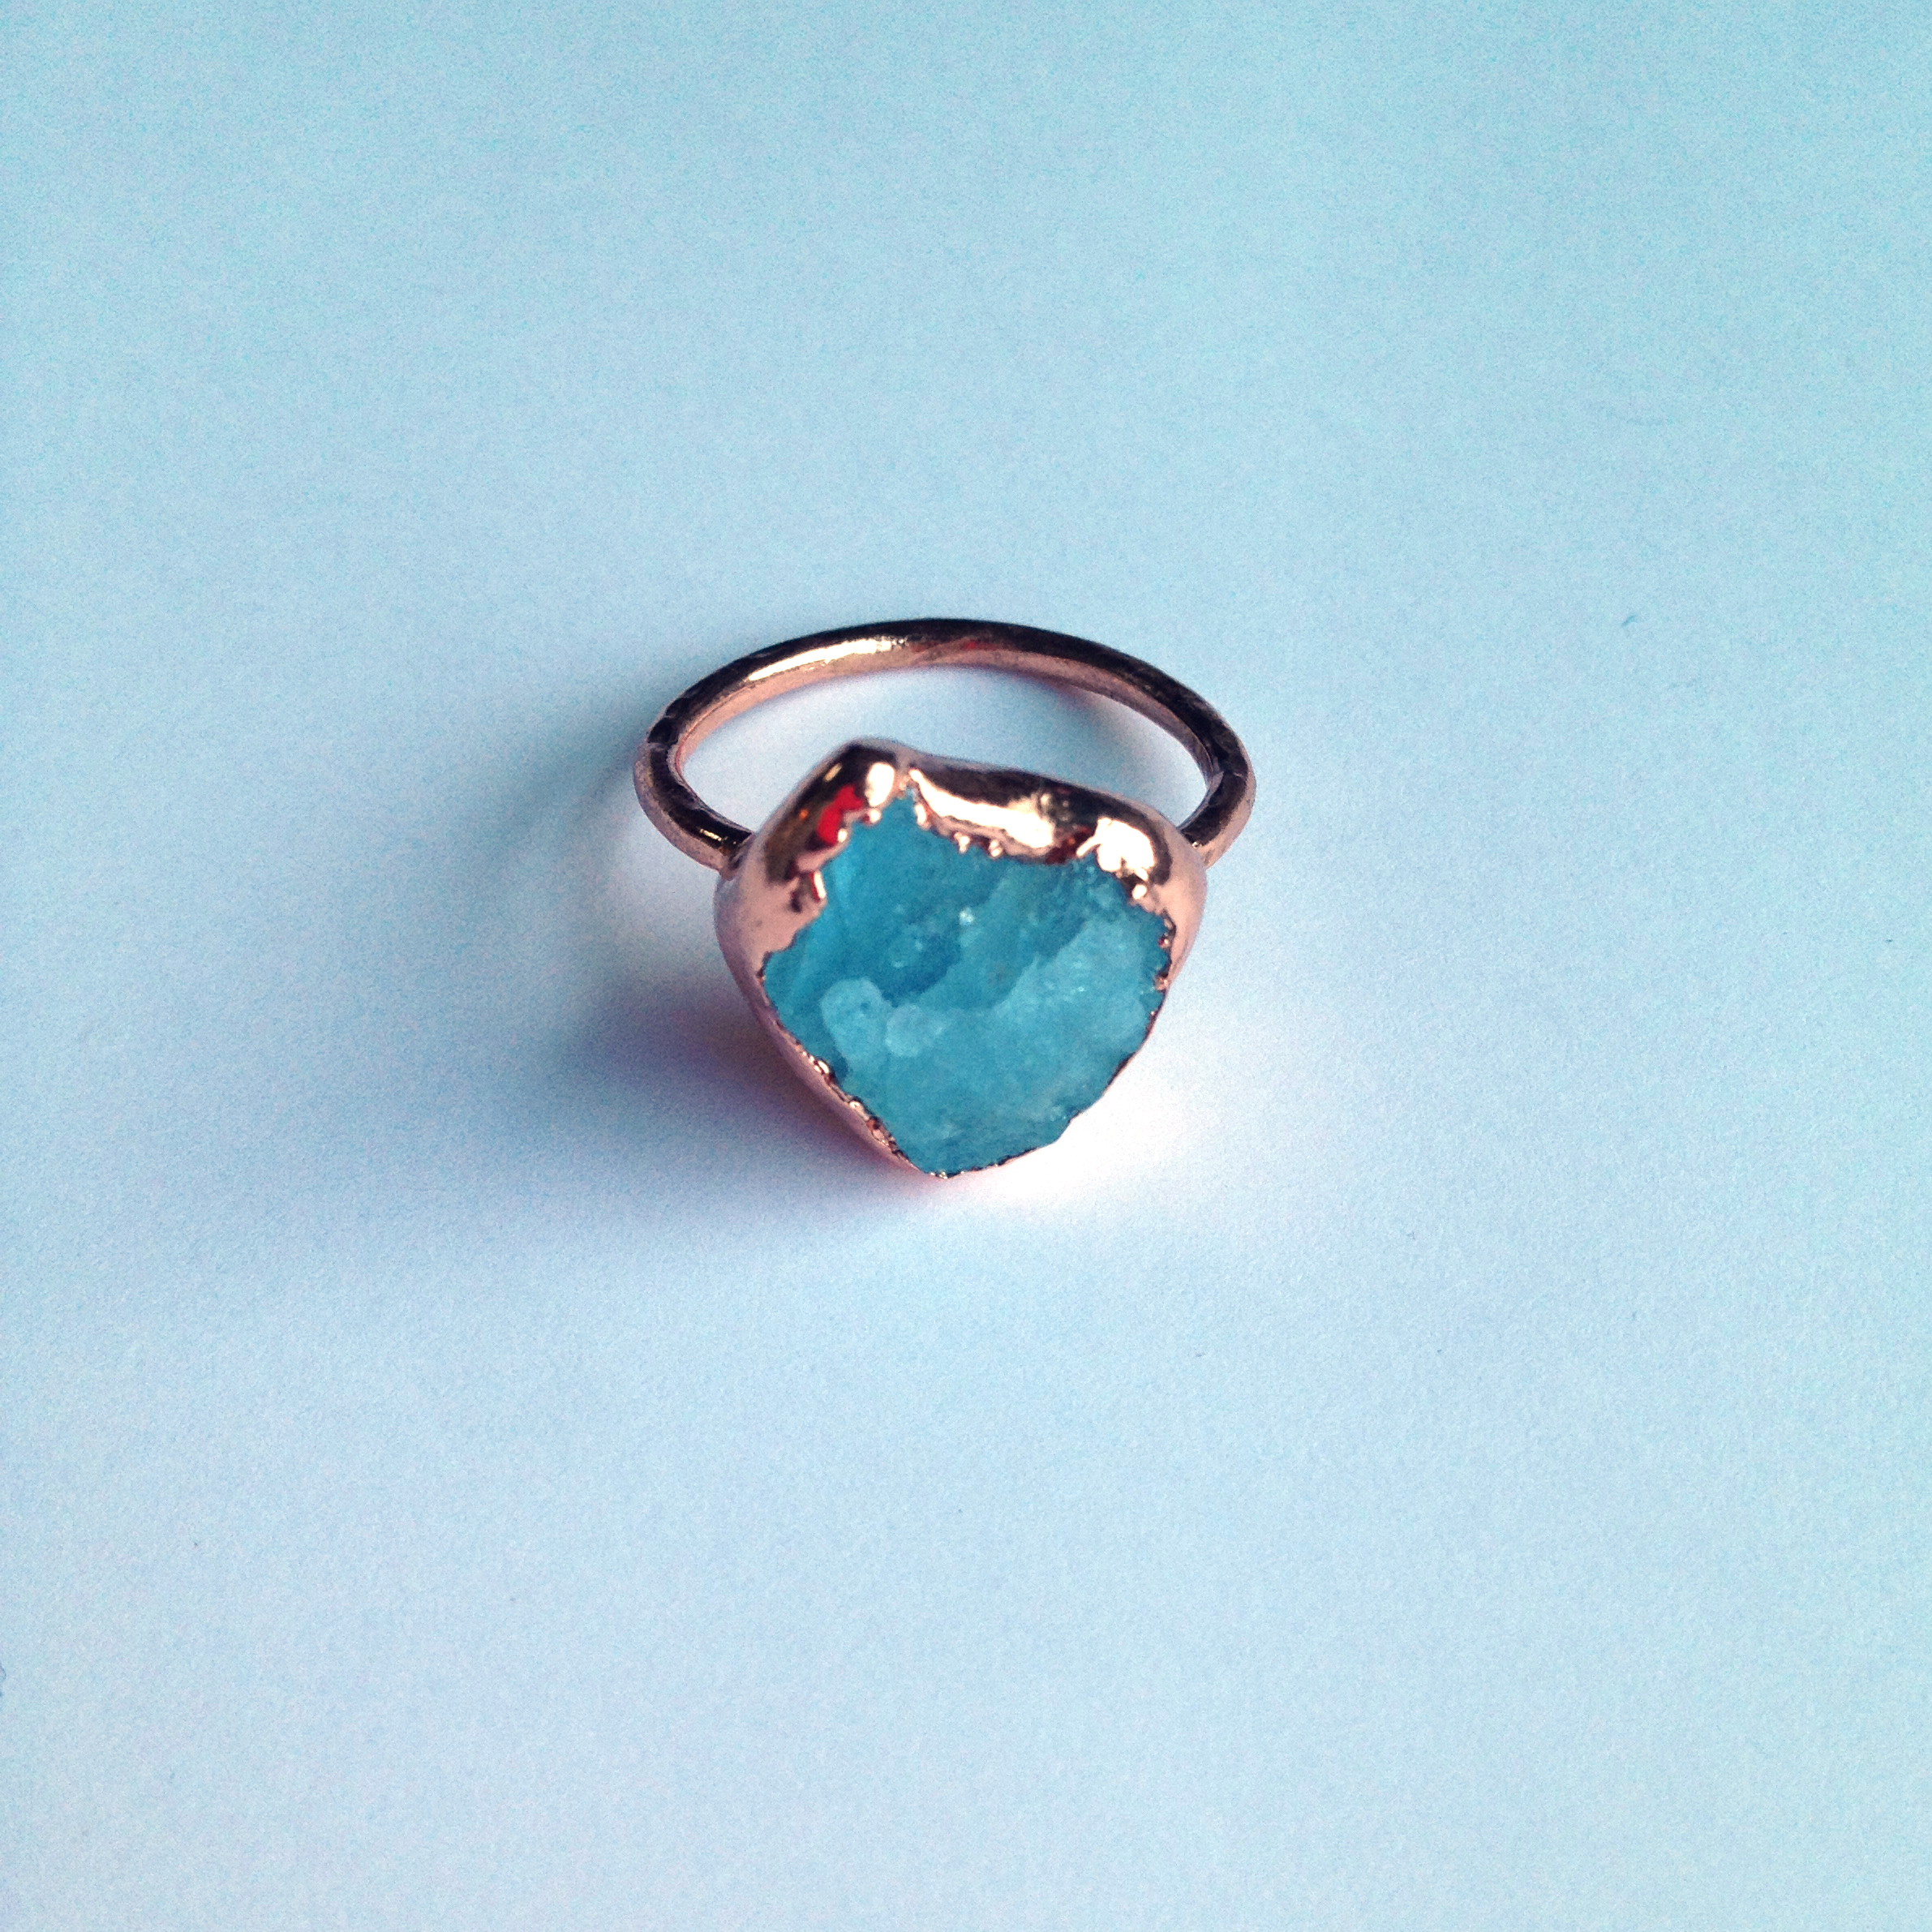 raw aquamarine nugget ring (pakistan) electroformed in shiny copper (size 8)